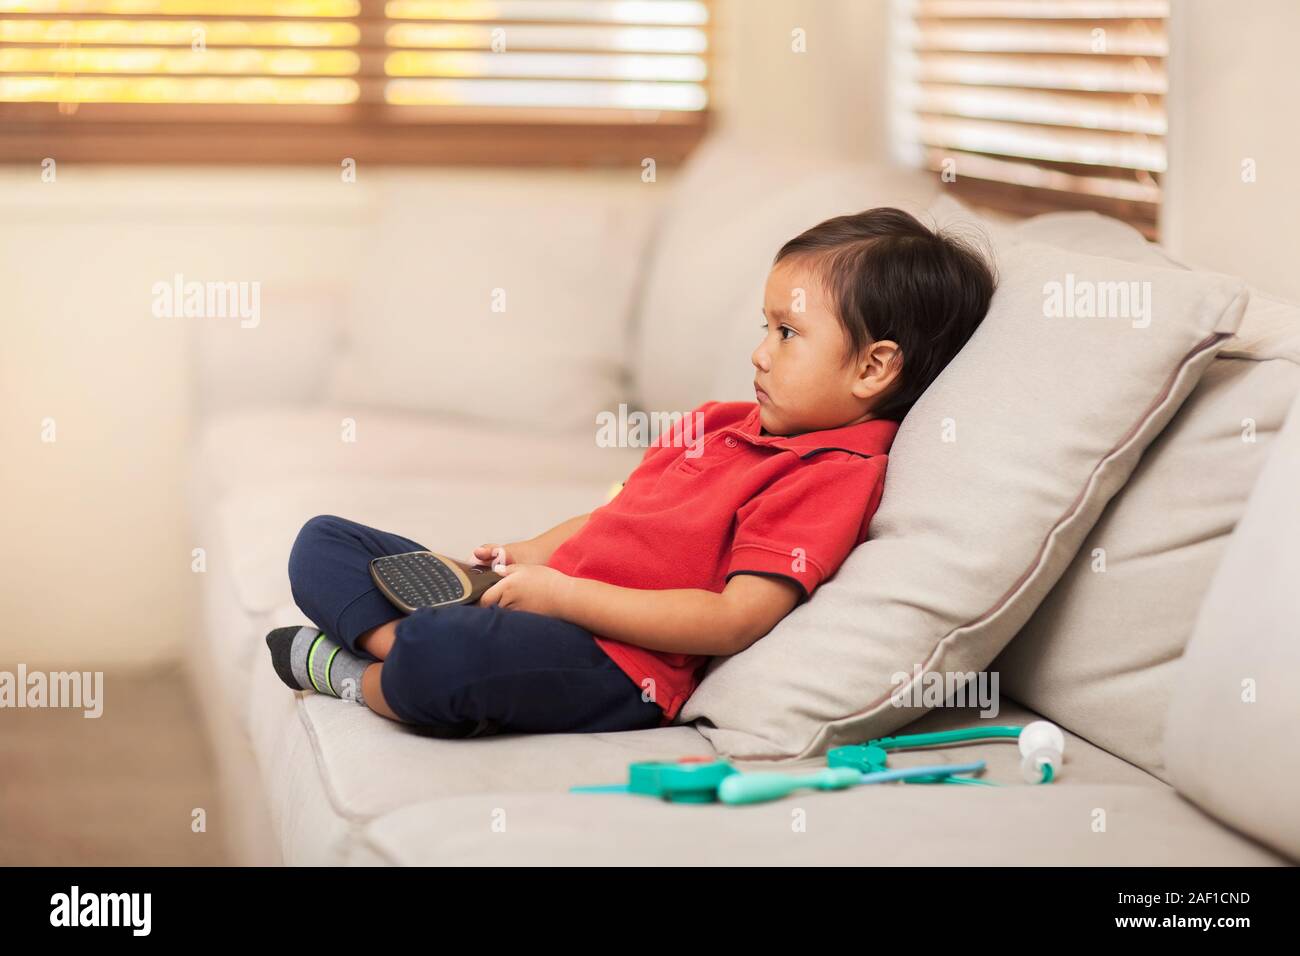 A little boy comfortably sitting on a living room couch and holding a remote control while watching tv. Stock Photo